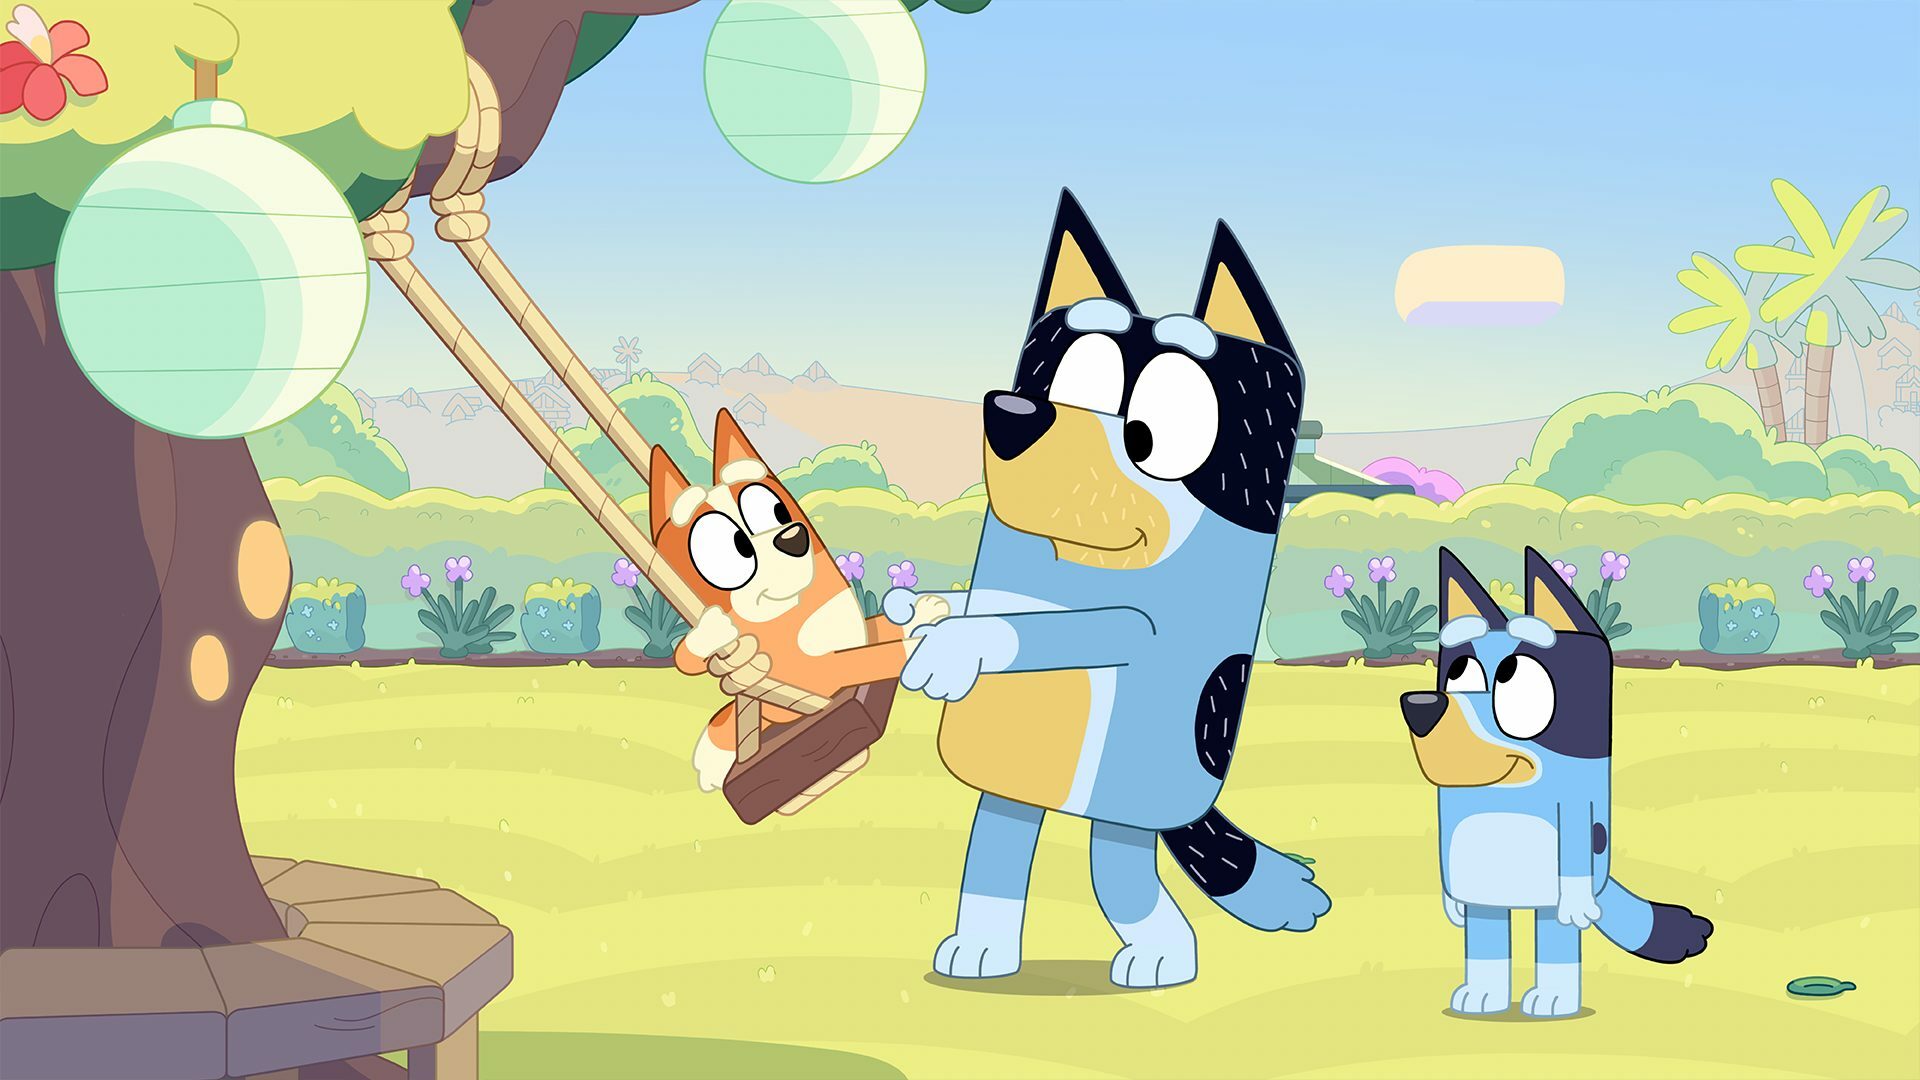 Bandit pulling Bingo on a swing while Bluey watches.